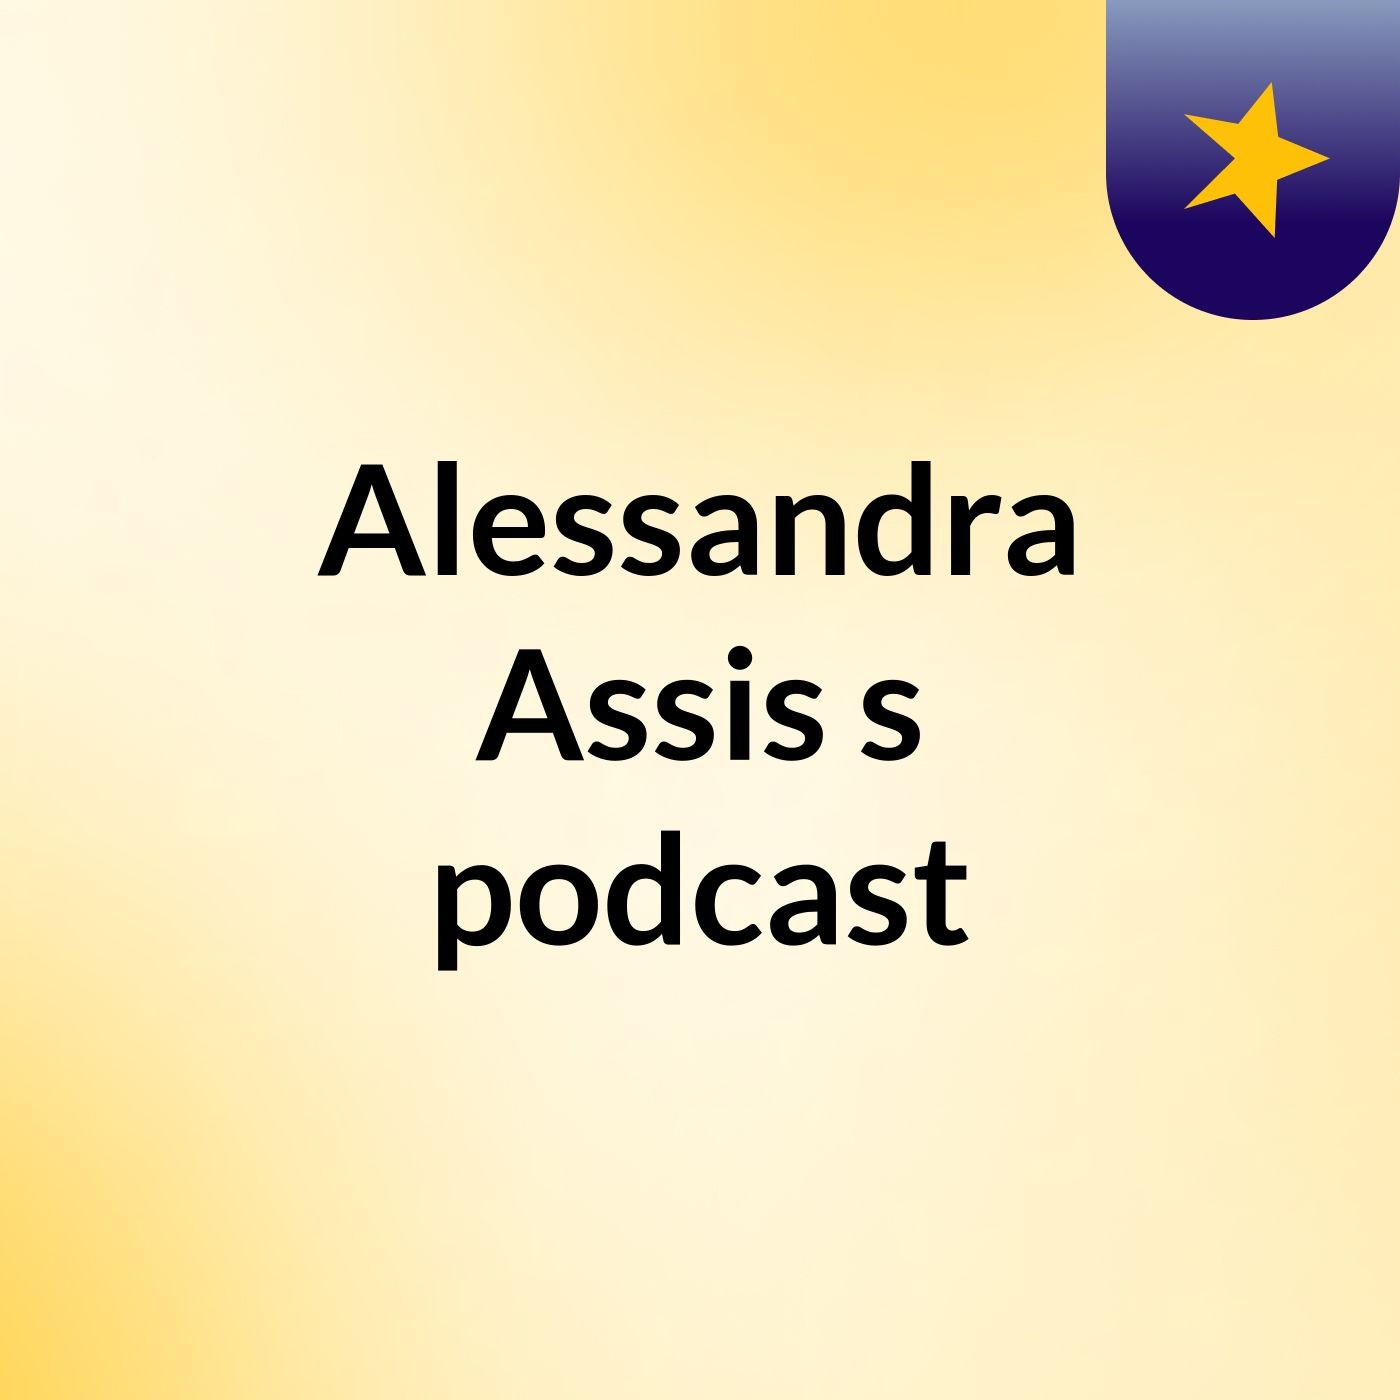 Alessandra Assis's podcast